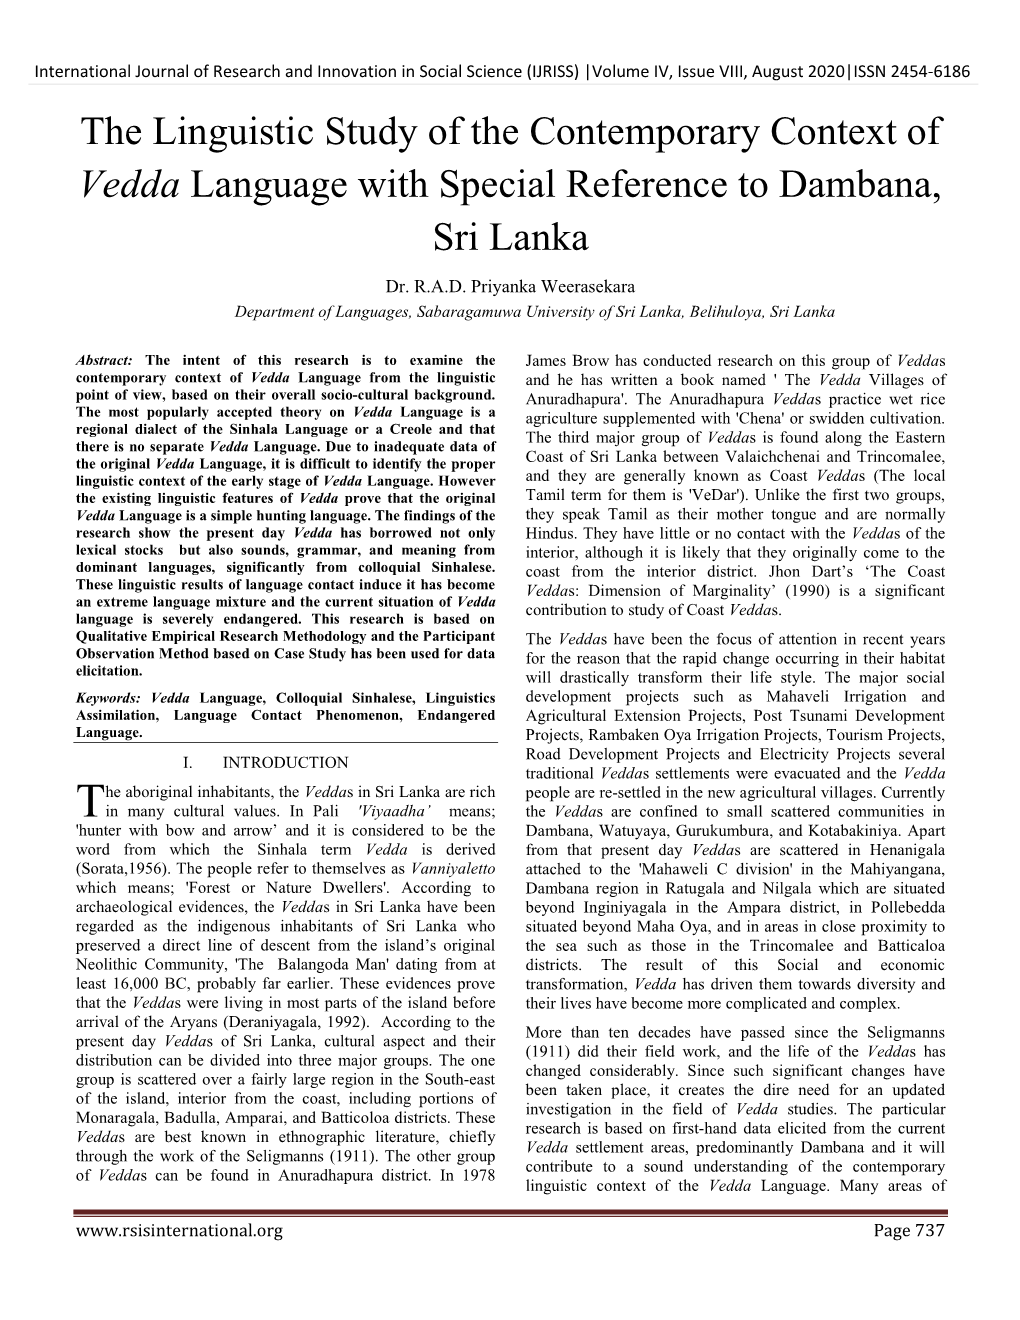 The Linguistic Study of the Contemporary Context of Vedda Language with Special Reference to Dambana, Sri Lanka